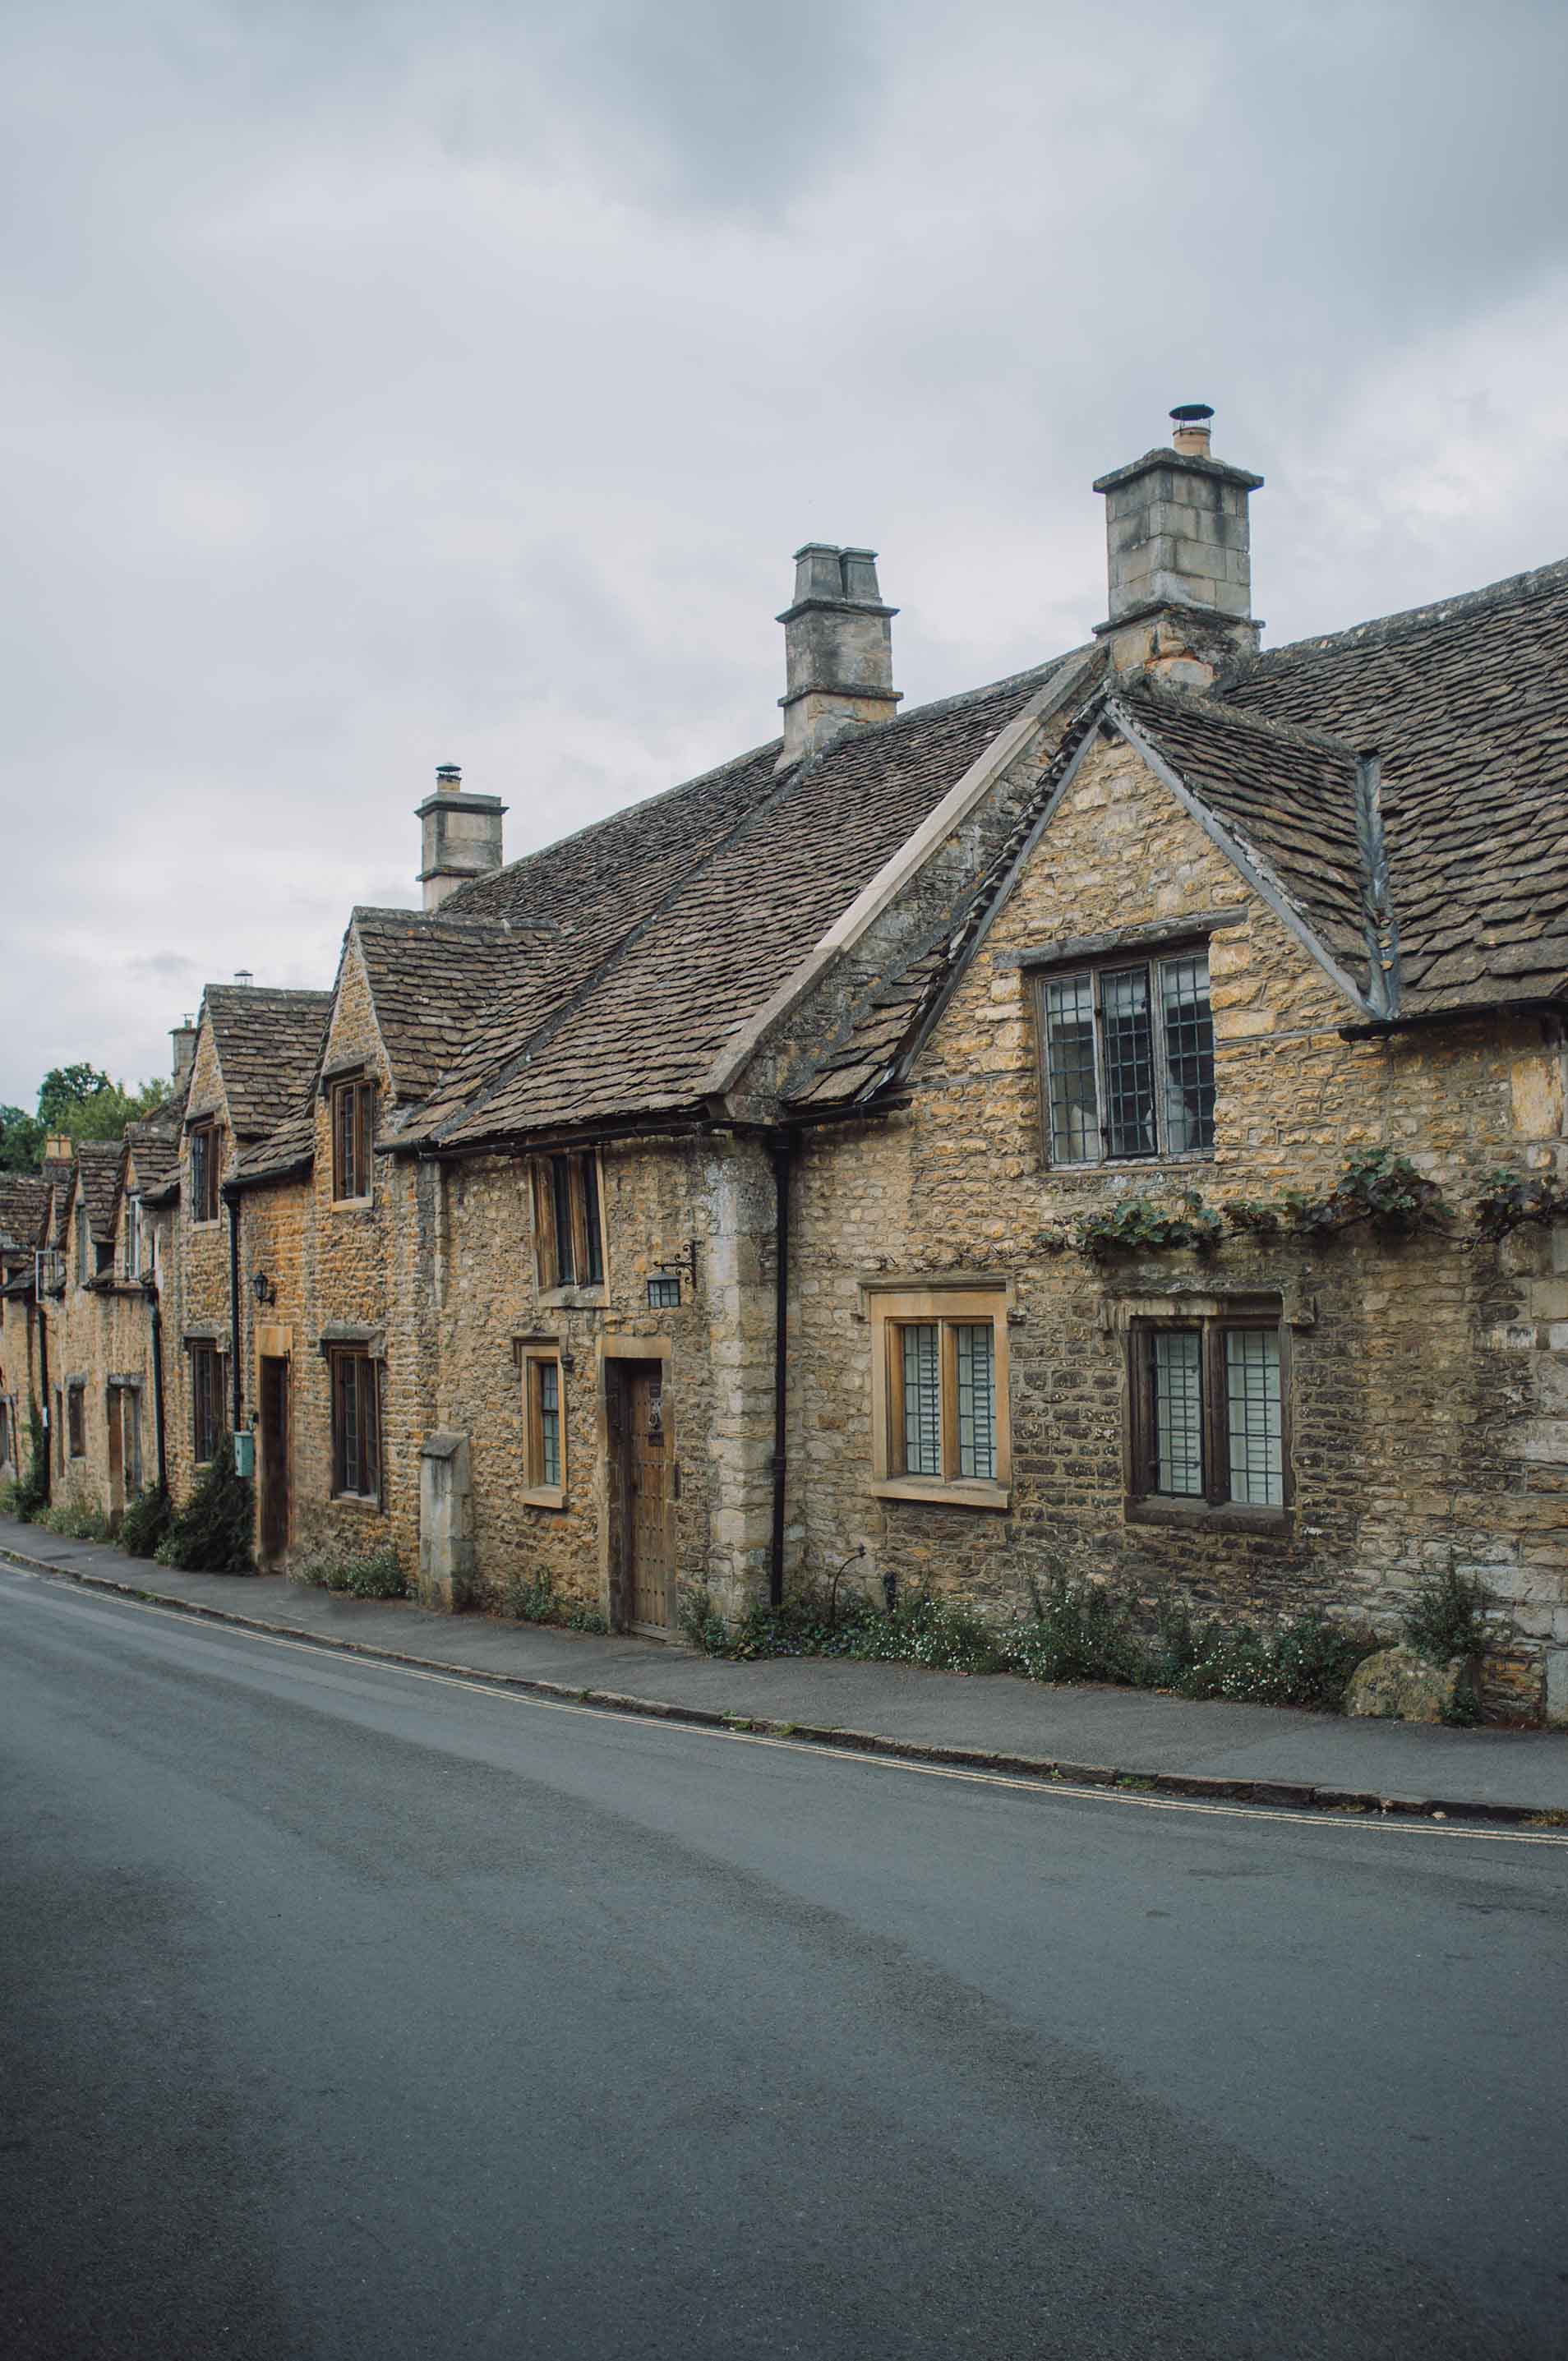 A view of traditional Cotswolds cottages